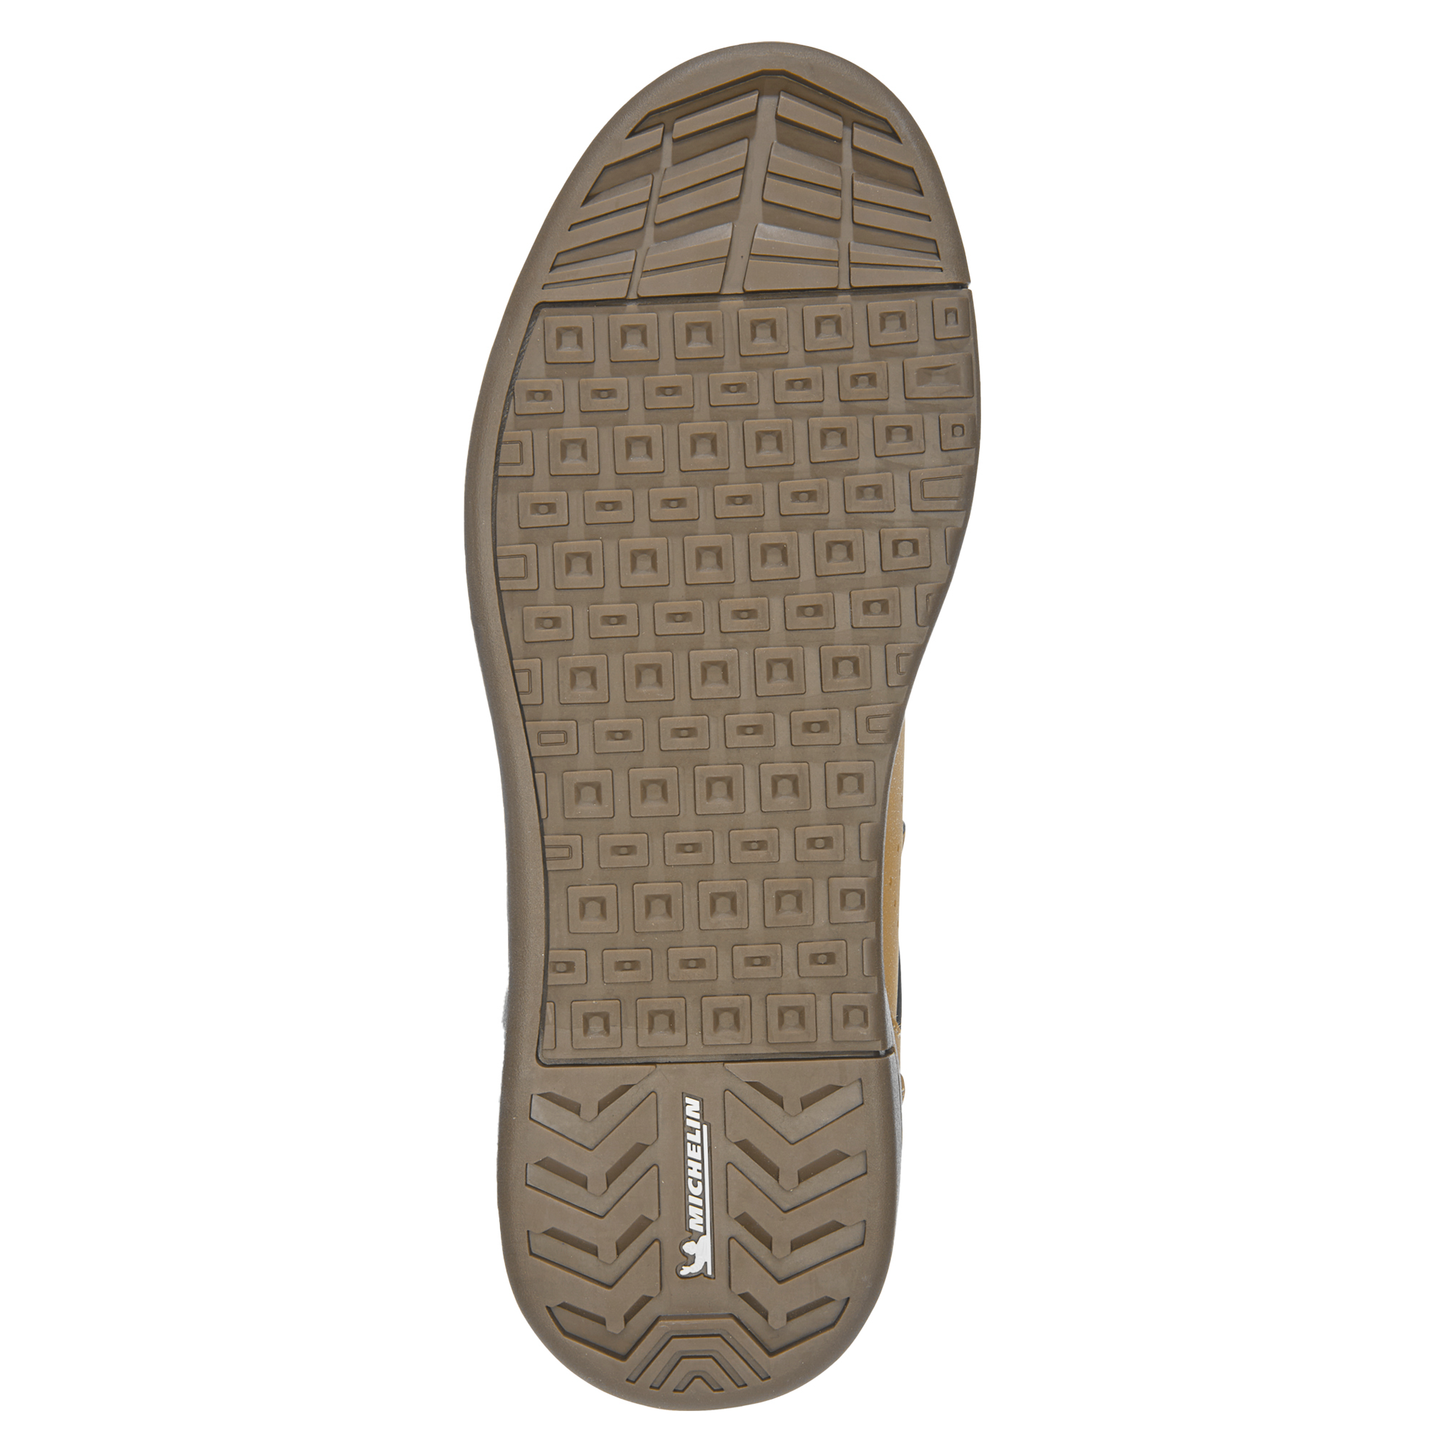 Etnies Camber Mid Michelin x TFTF Flat Shoes - US 14.0 - Tan - Gum - Image 4